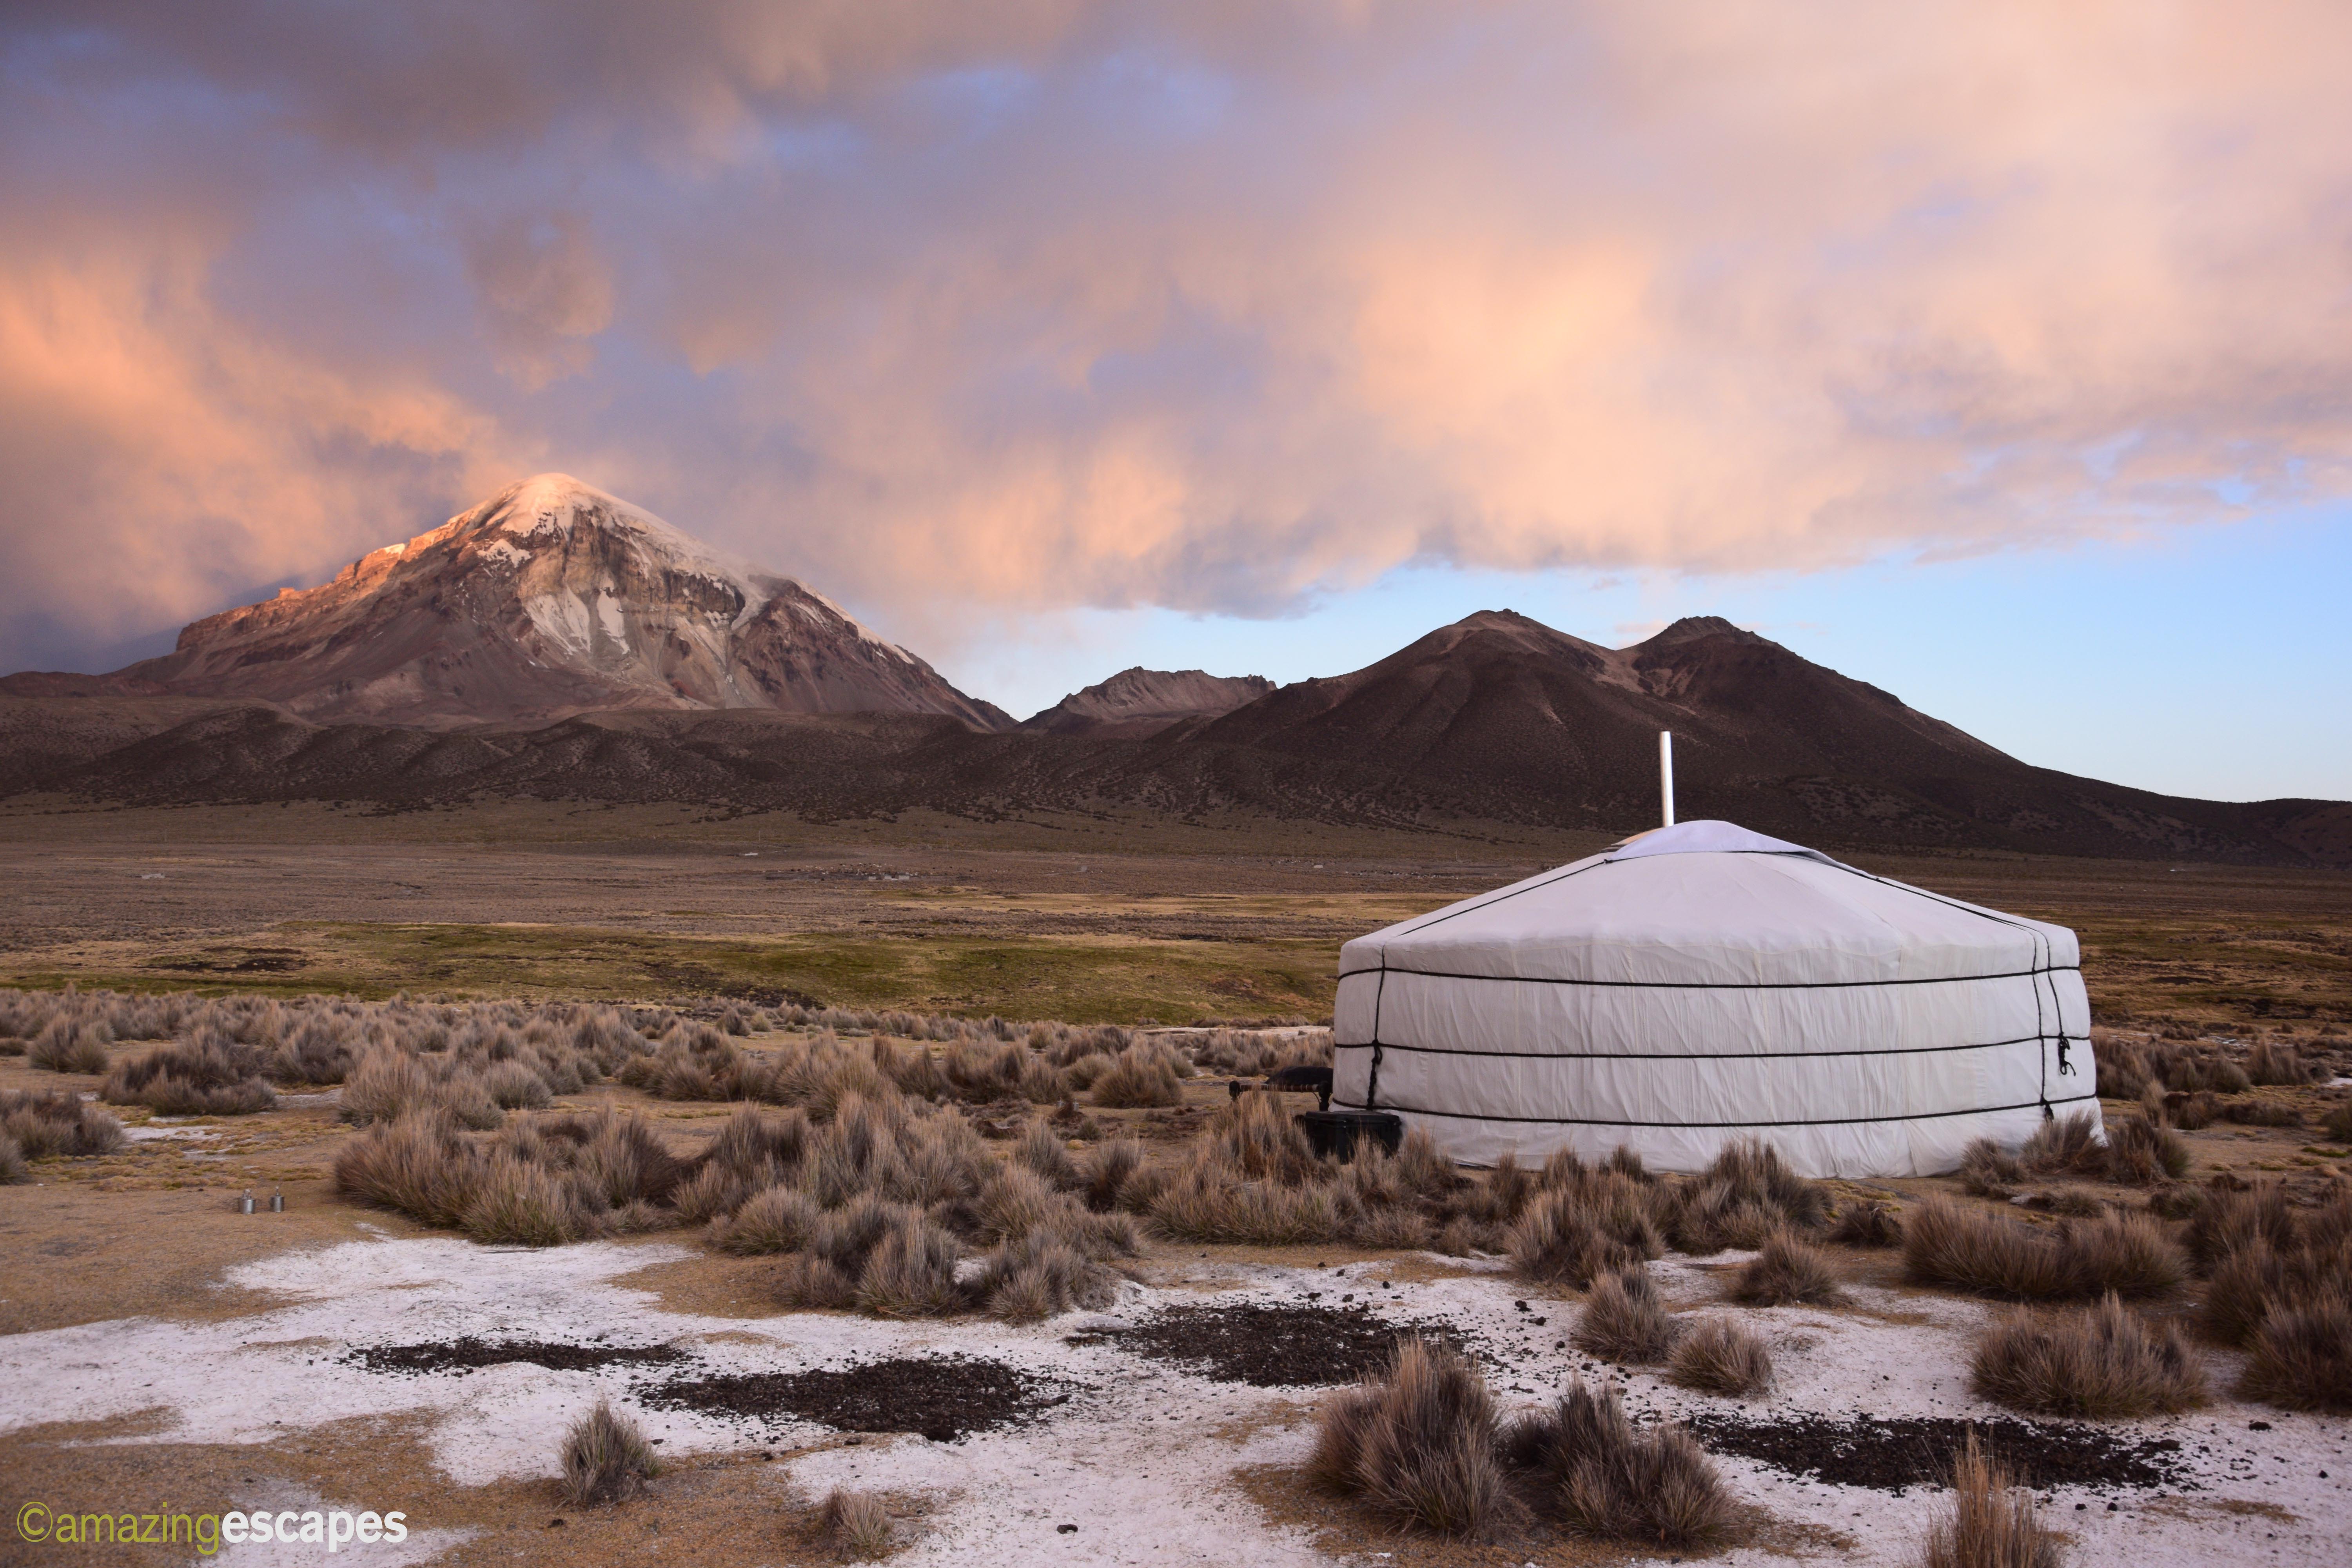 You Can Travel to the World’s Most Remote Places and Stay in a Luxury Tent, Complete With Your Own Butler, Spa and Disco Bar